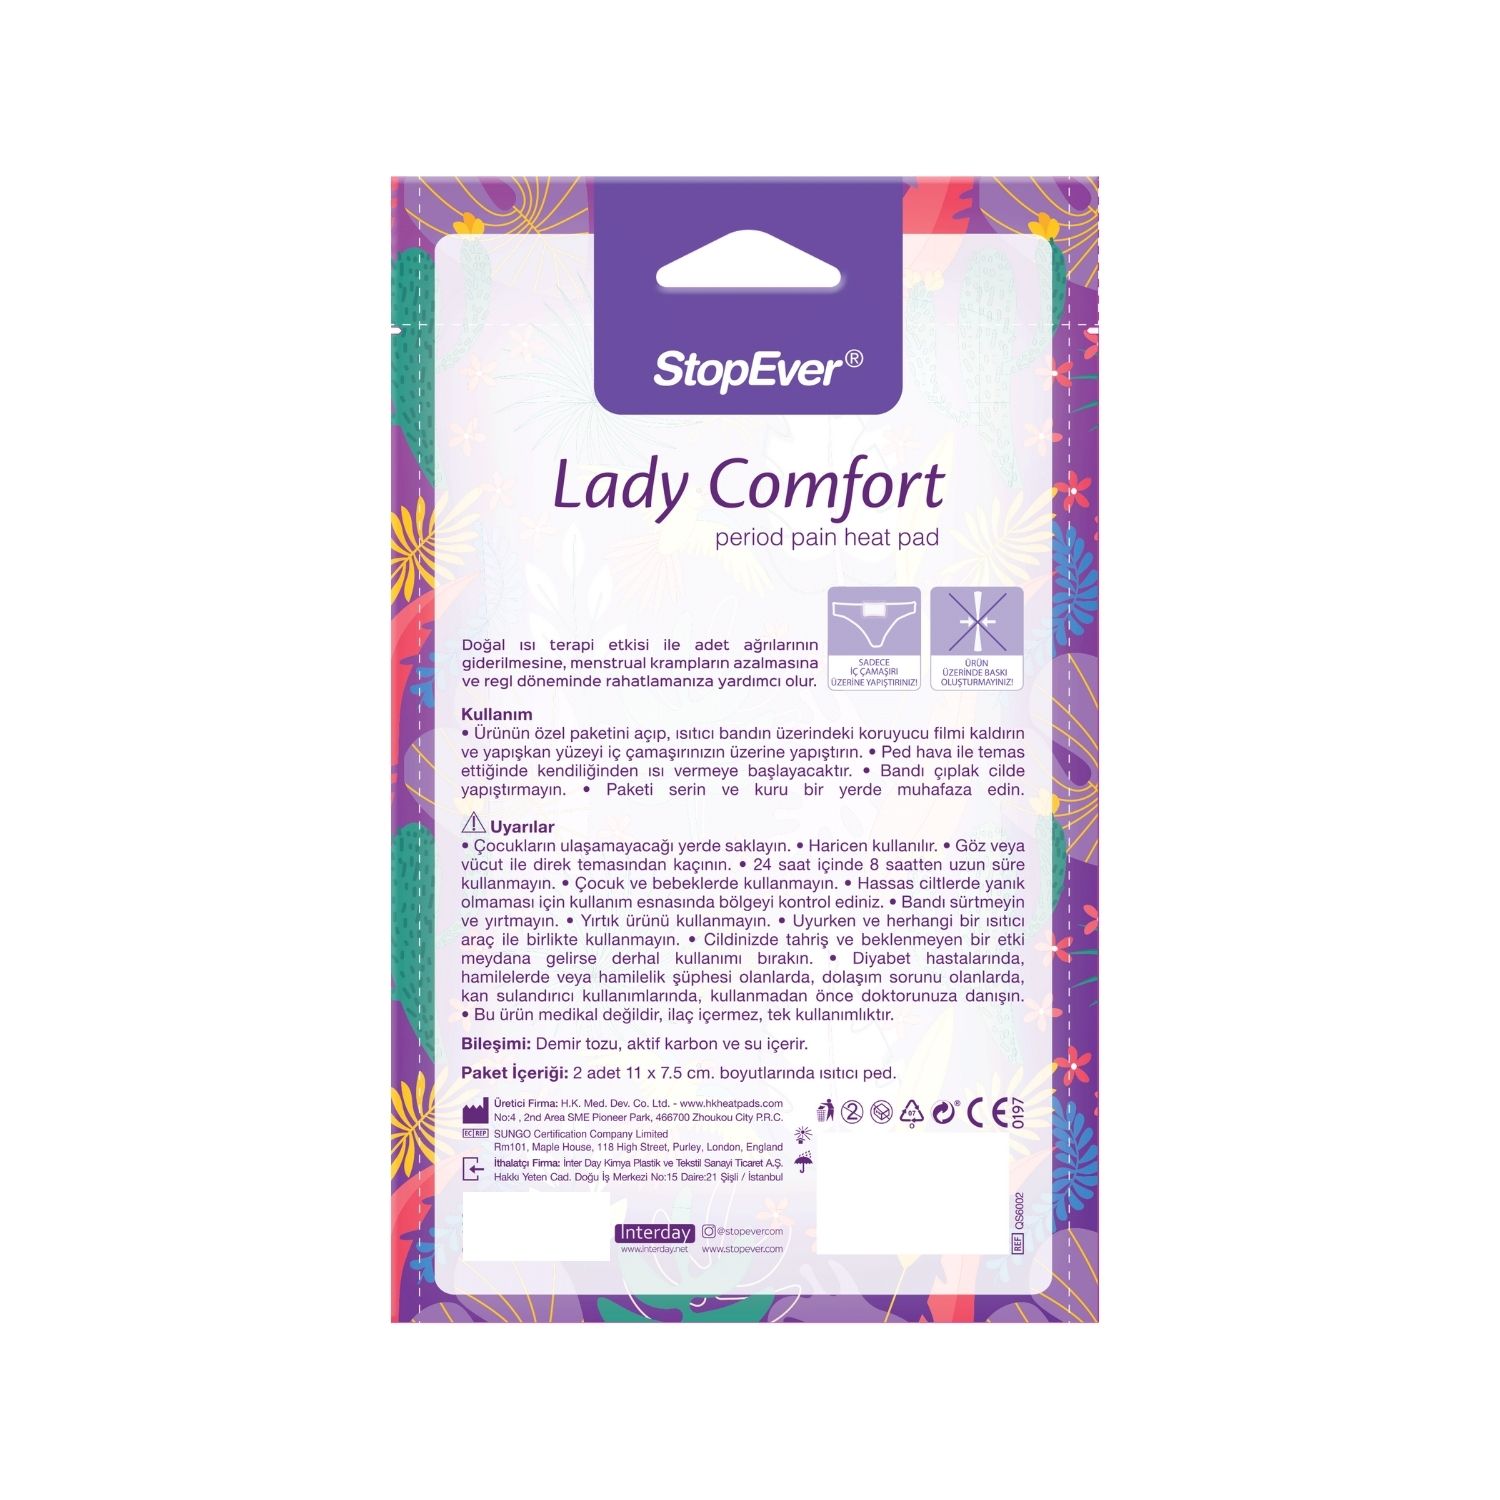 02 StopEver LadyComfort Isitici Ped Back Stop Ever